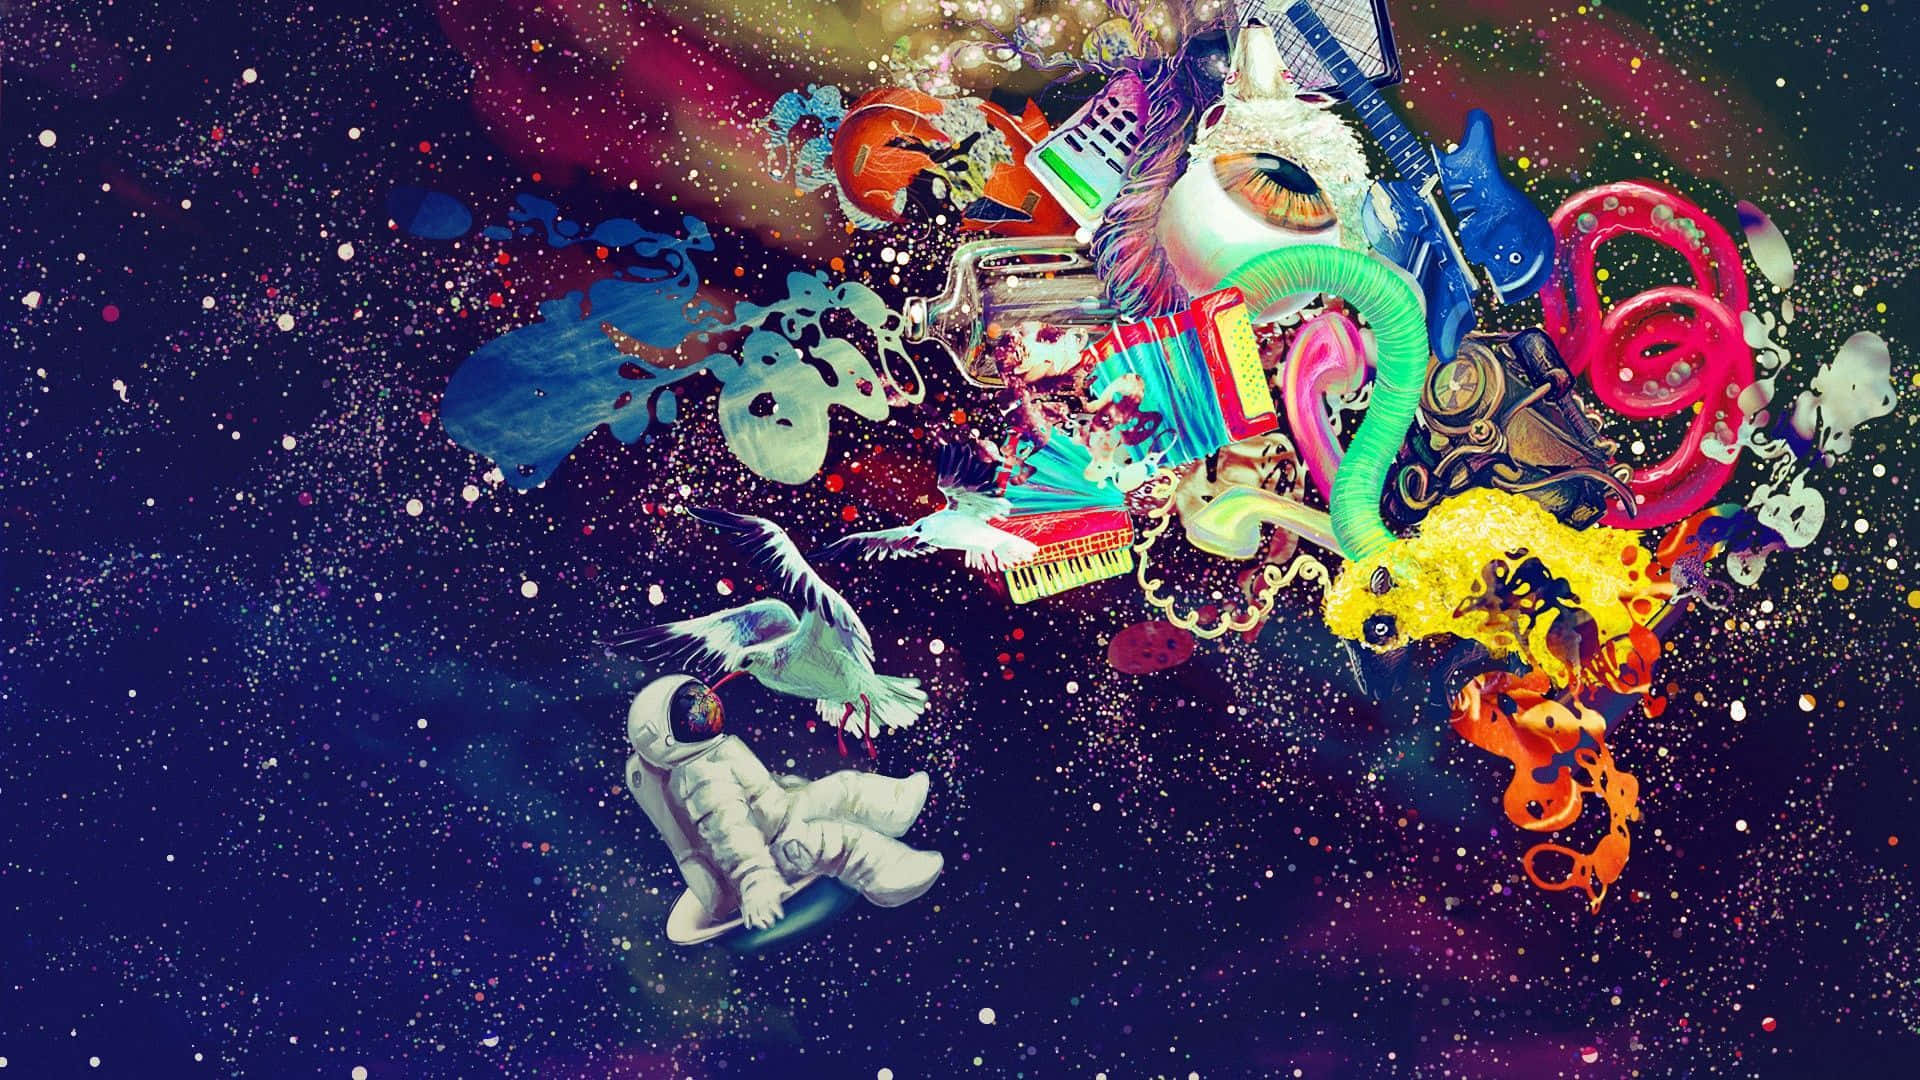 Trippy Astronaut In Space With Random Objects Wallpaper